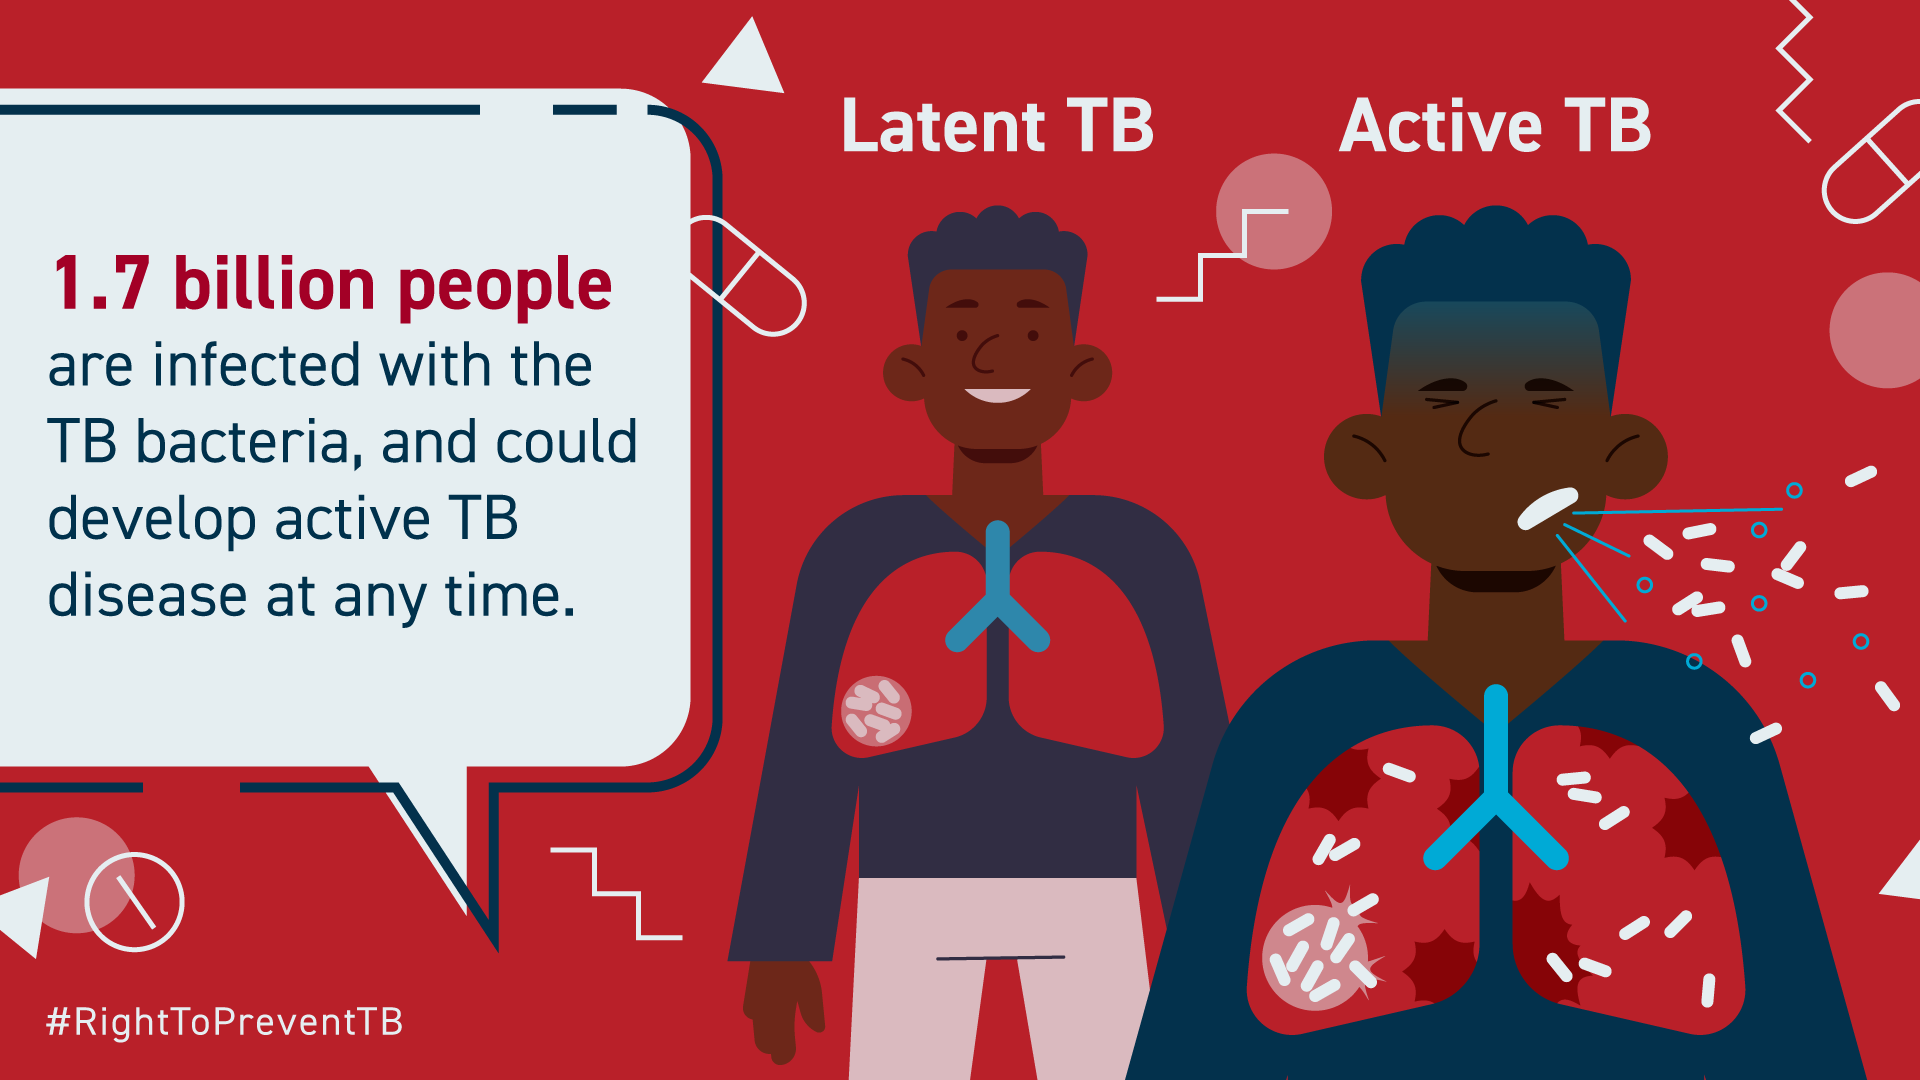 graphic that reads "1.7 billion people are infected with the TB bacteria, and could develop active TB disease at any time." Shows person who seems fine with latent tb, and then a person who's coughing with active TB,